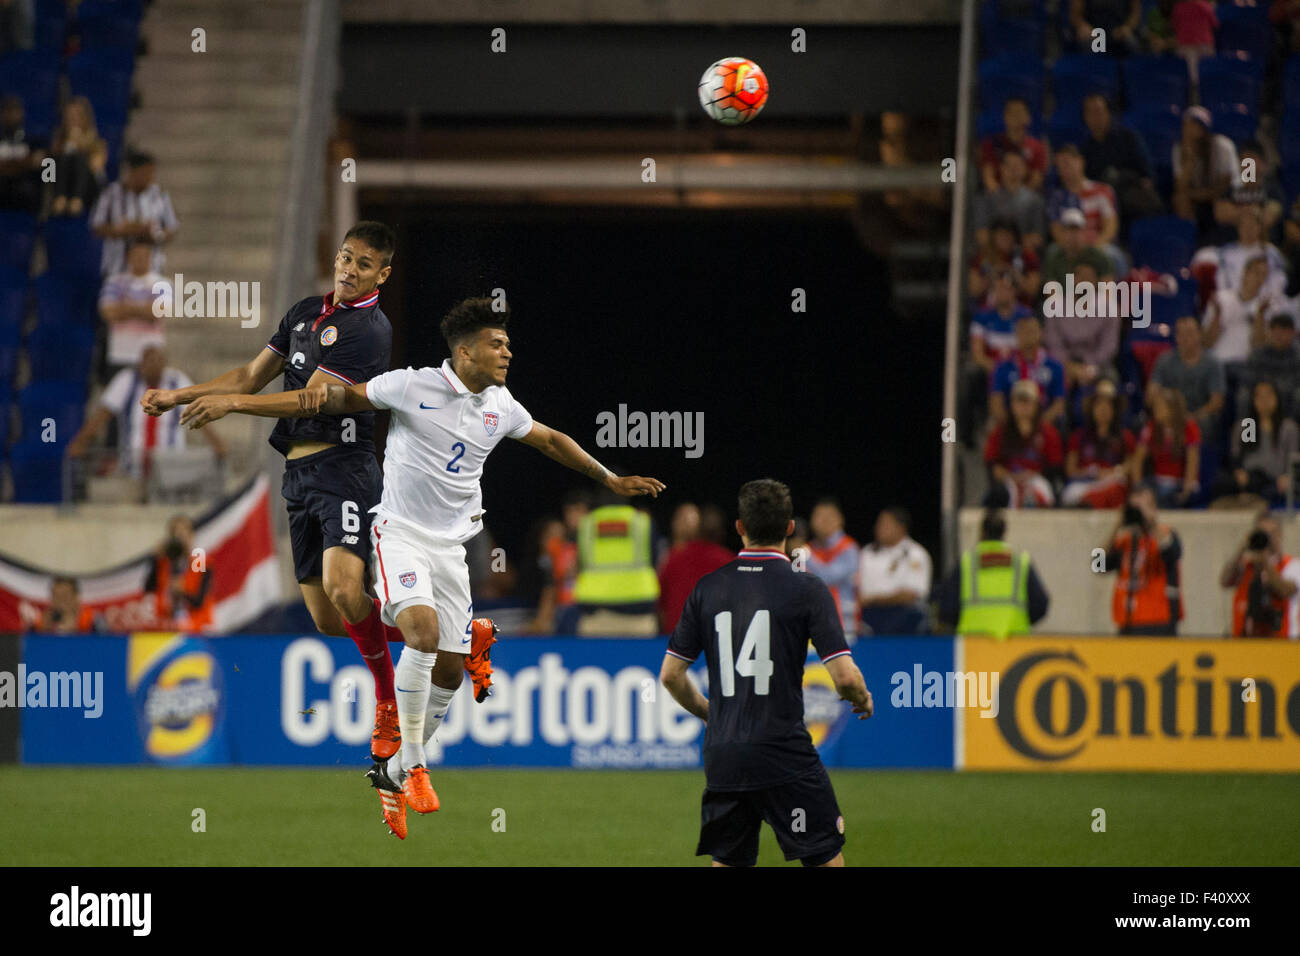 Harrison, NJ, USA. 13th Oct, 2015. US Men's National Team midfielder DeAndre Yedlin (2) heads the ball along with Costa Rica defender Oscar Duarte (6) during The USA Men's National Team vs. Costa Rica Men's National Team- international friendly at Red Bull Arena - Harrison, NJ. Costa Rica defeated The US Men's National Team 1-0. Mandatory Credit: Kostas Lymperopoulos/Cal Sport Media Credit:  Cal Sport Media/Alamy Live News Stock Photo